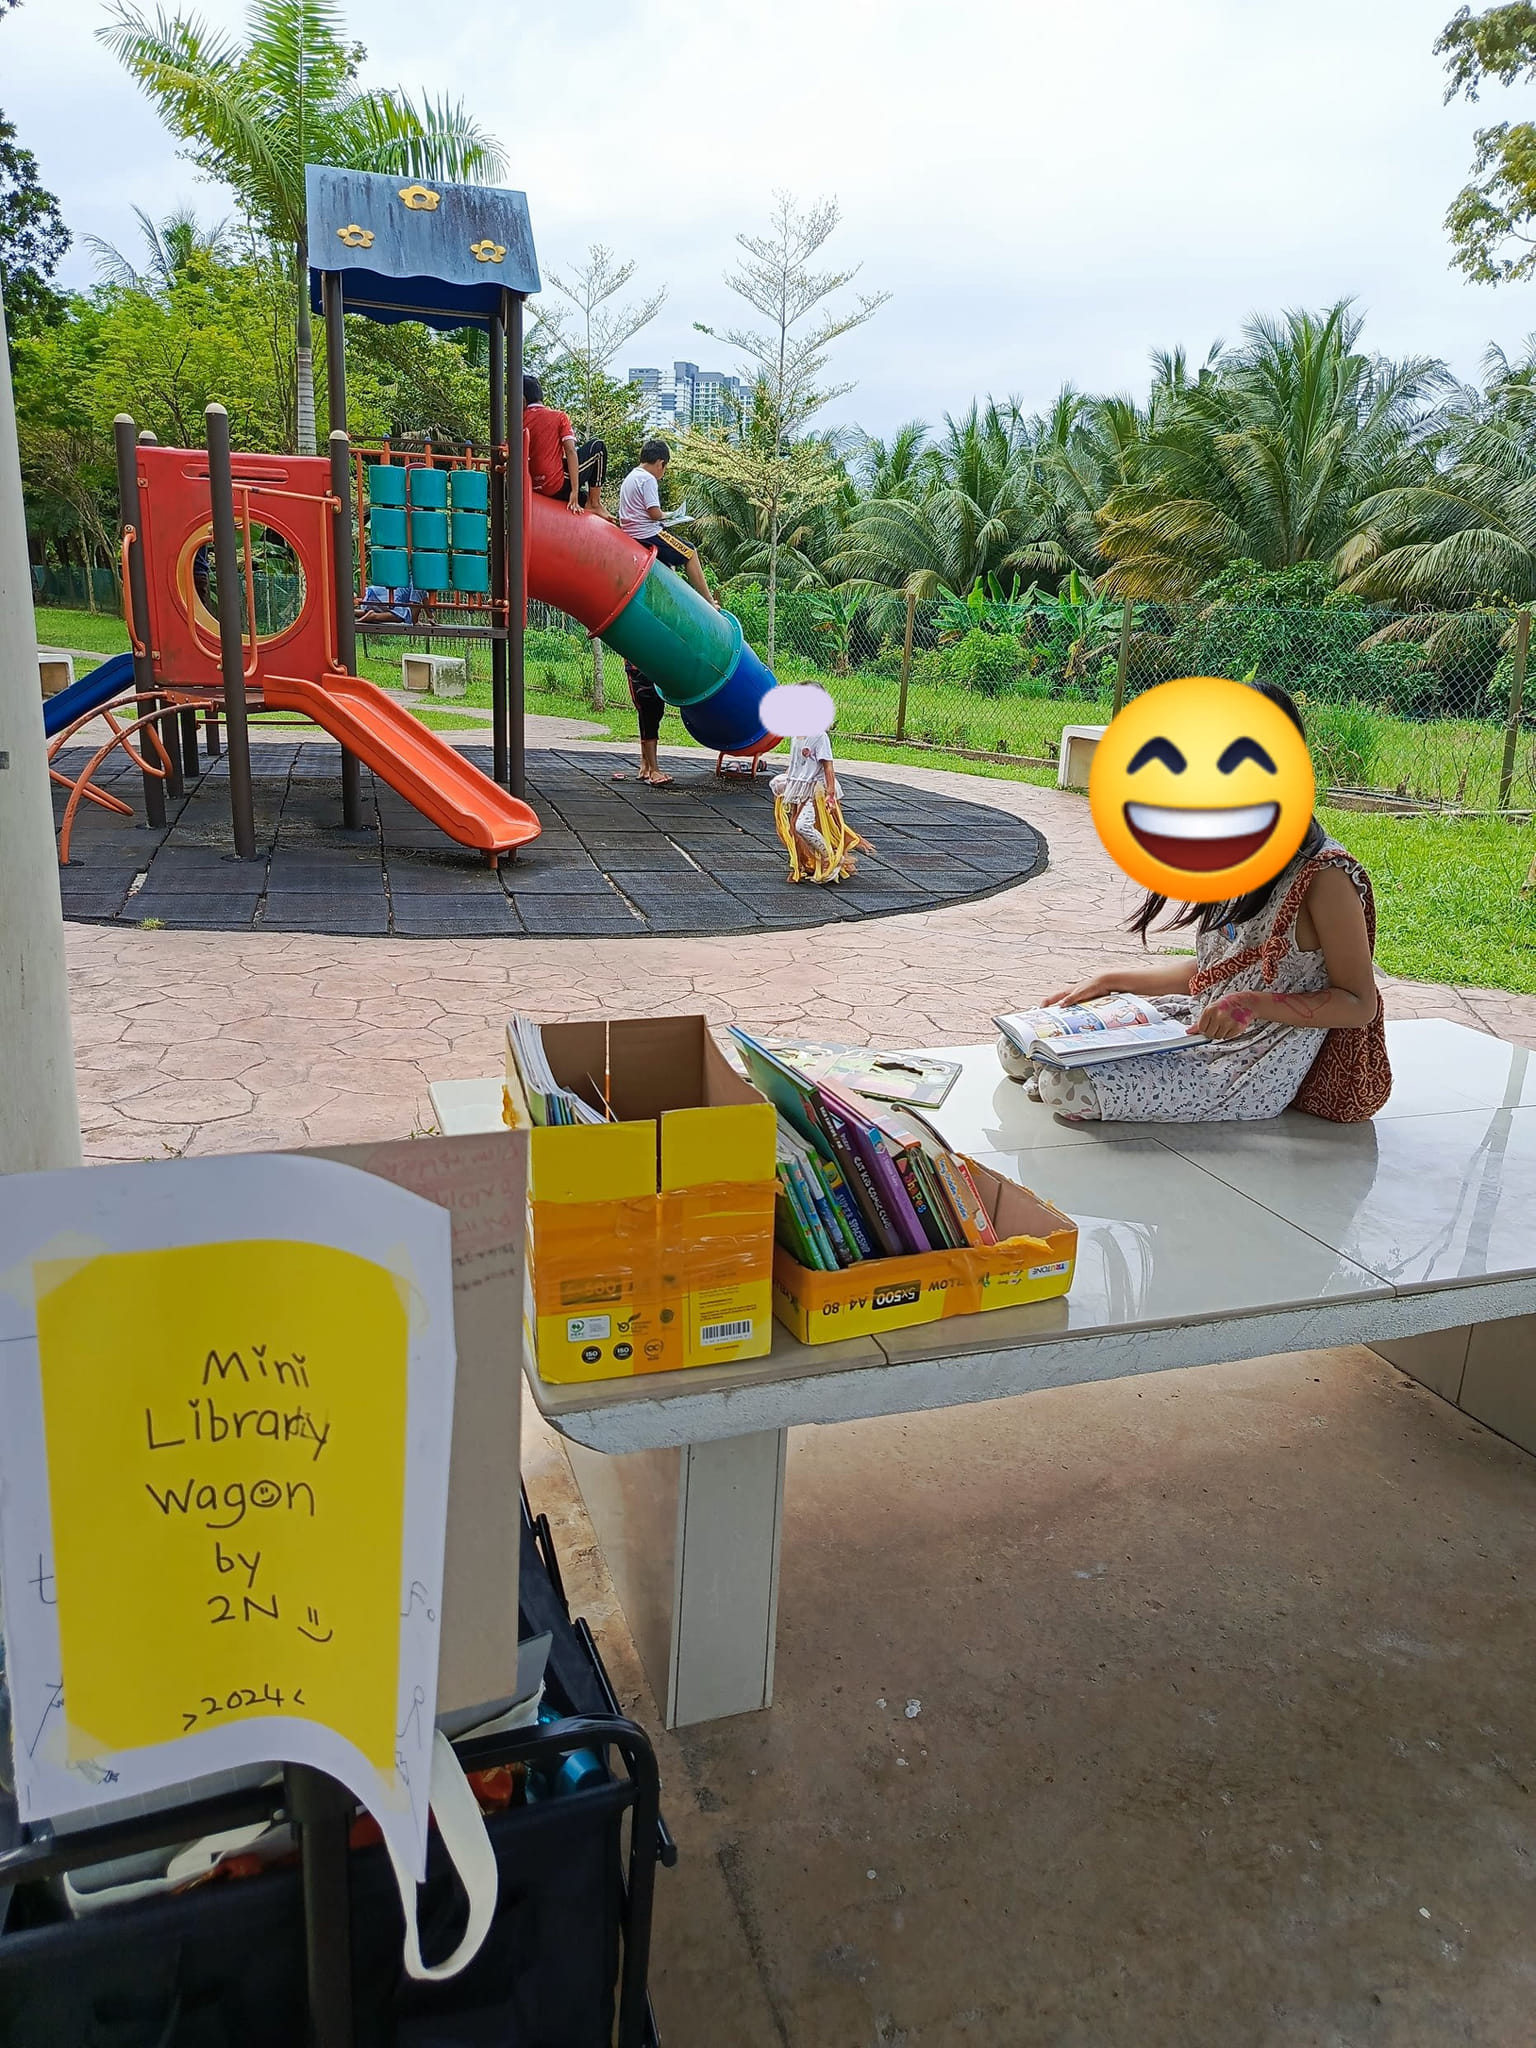 M'sian woman wins netizens' praise for setting up mini library in playground for children